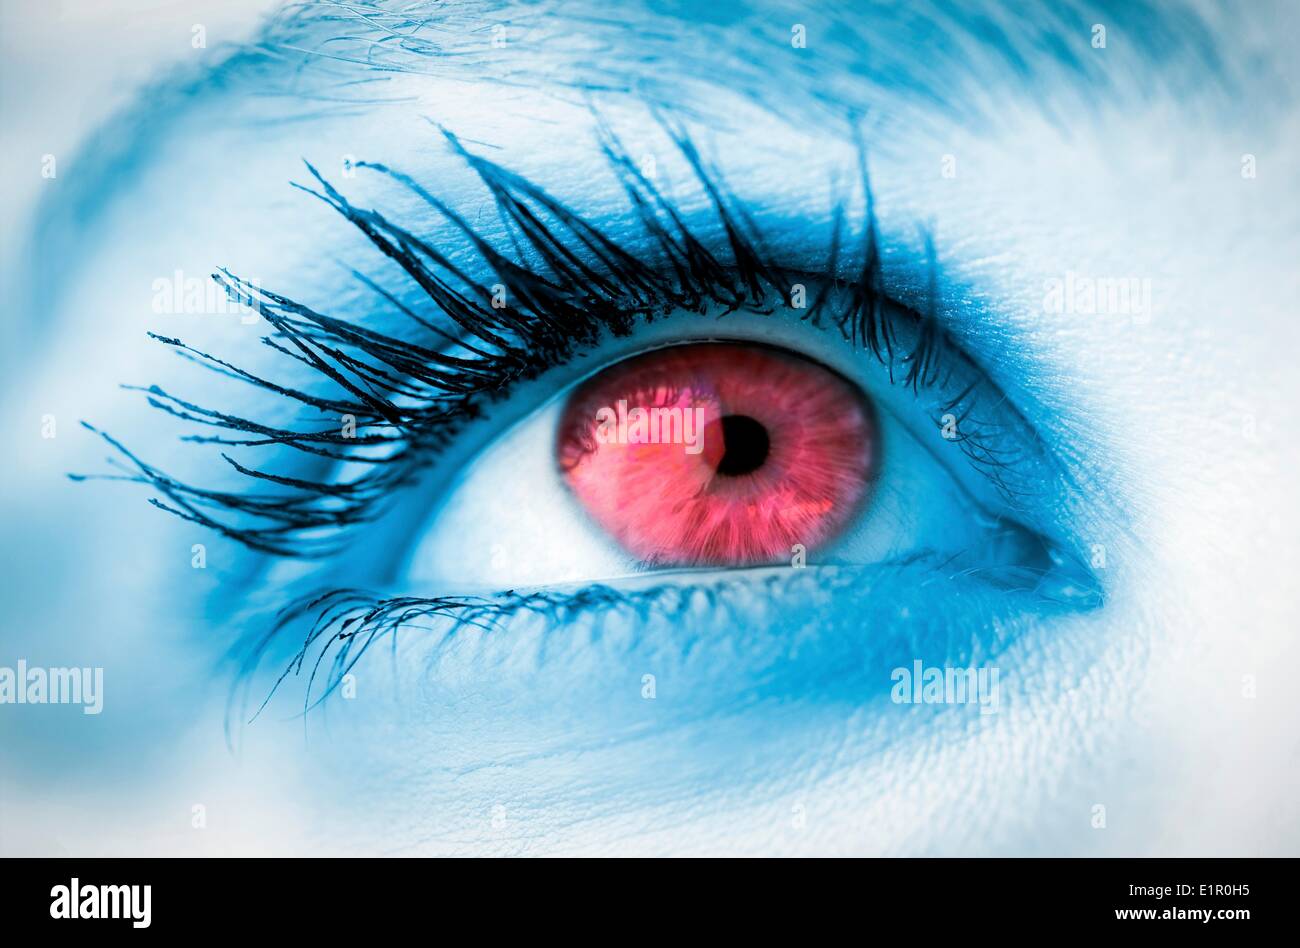 Red eye on blue face Stock Photo